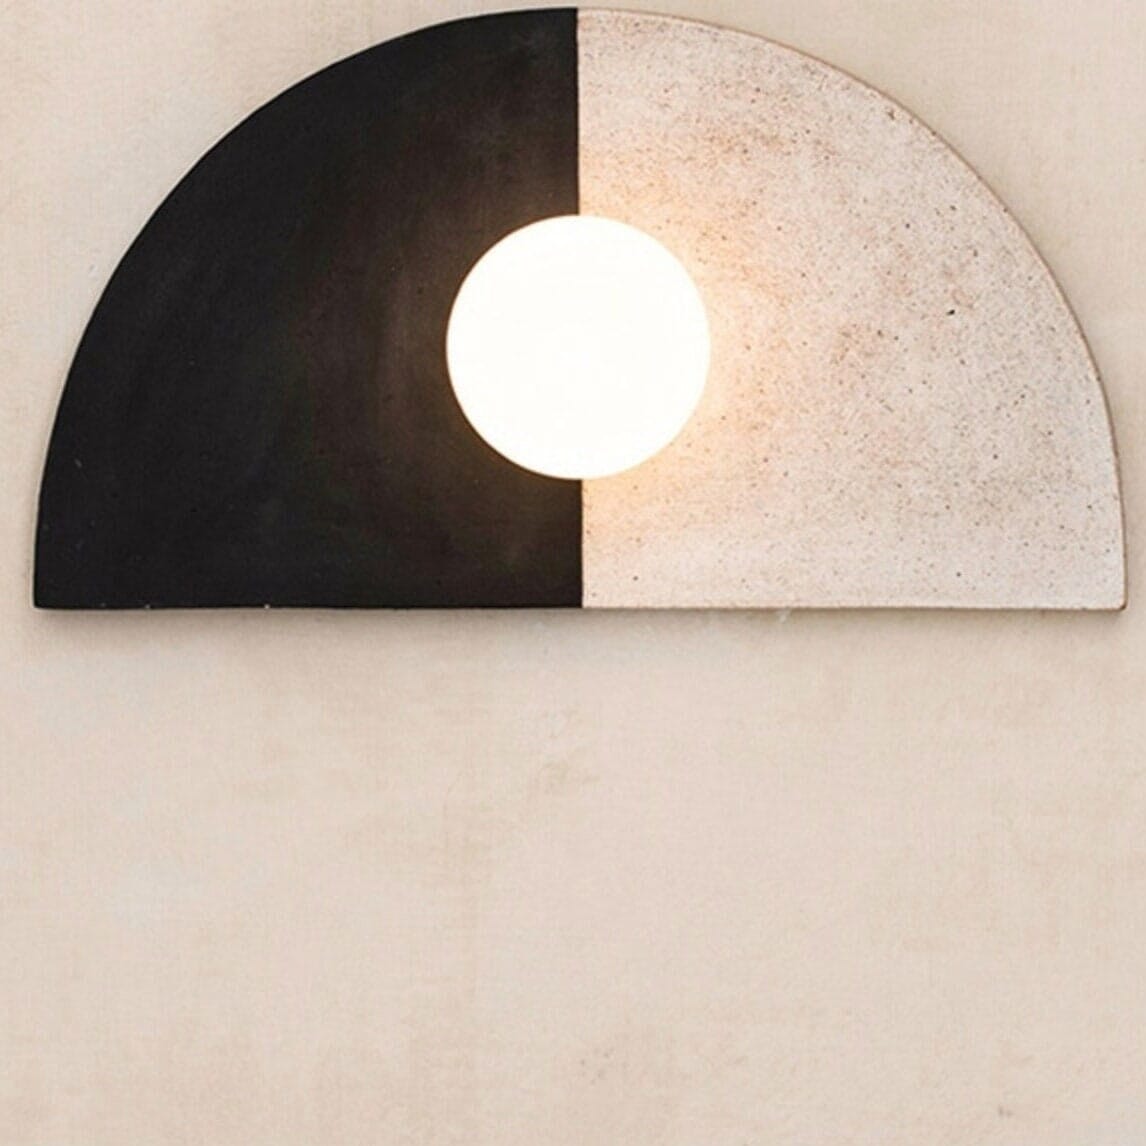 Minimalist Sconce Half circle Wall Lamp 2 Colors - Wall Sconce Light - Bedside Lamp Sconces Artedimo 1/2 circle 2 colors Warm (2700-3500K) 